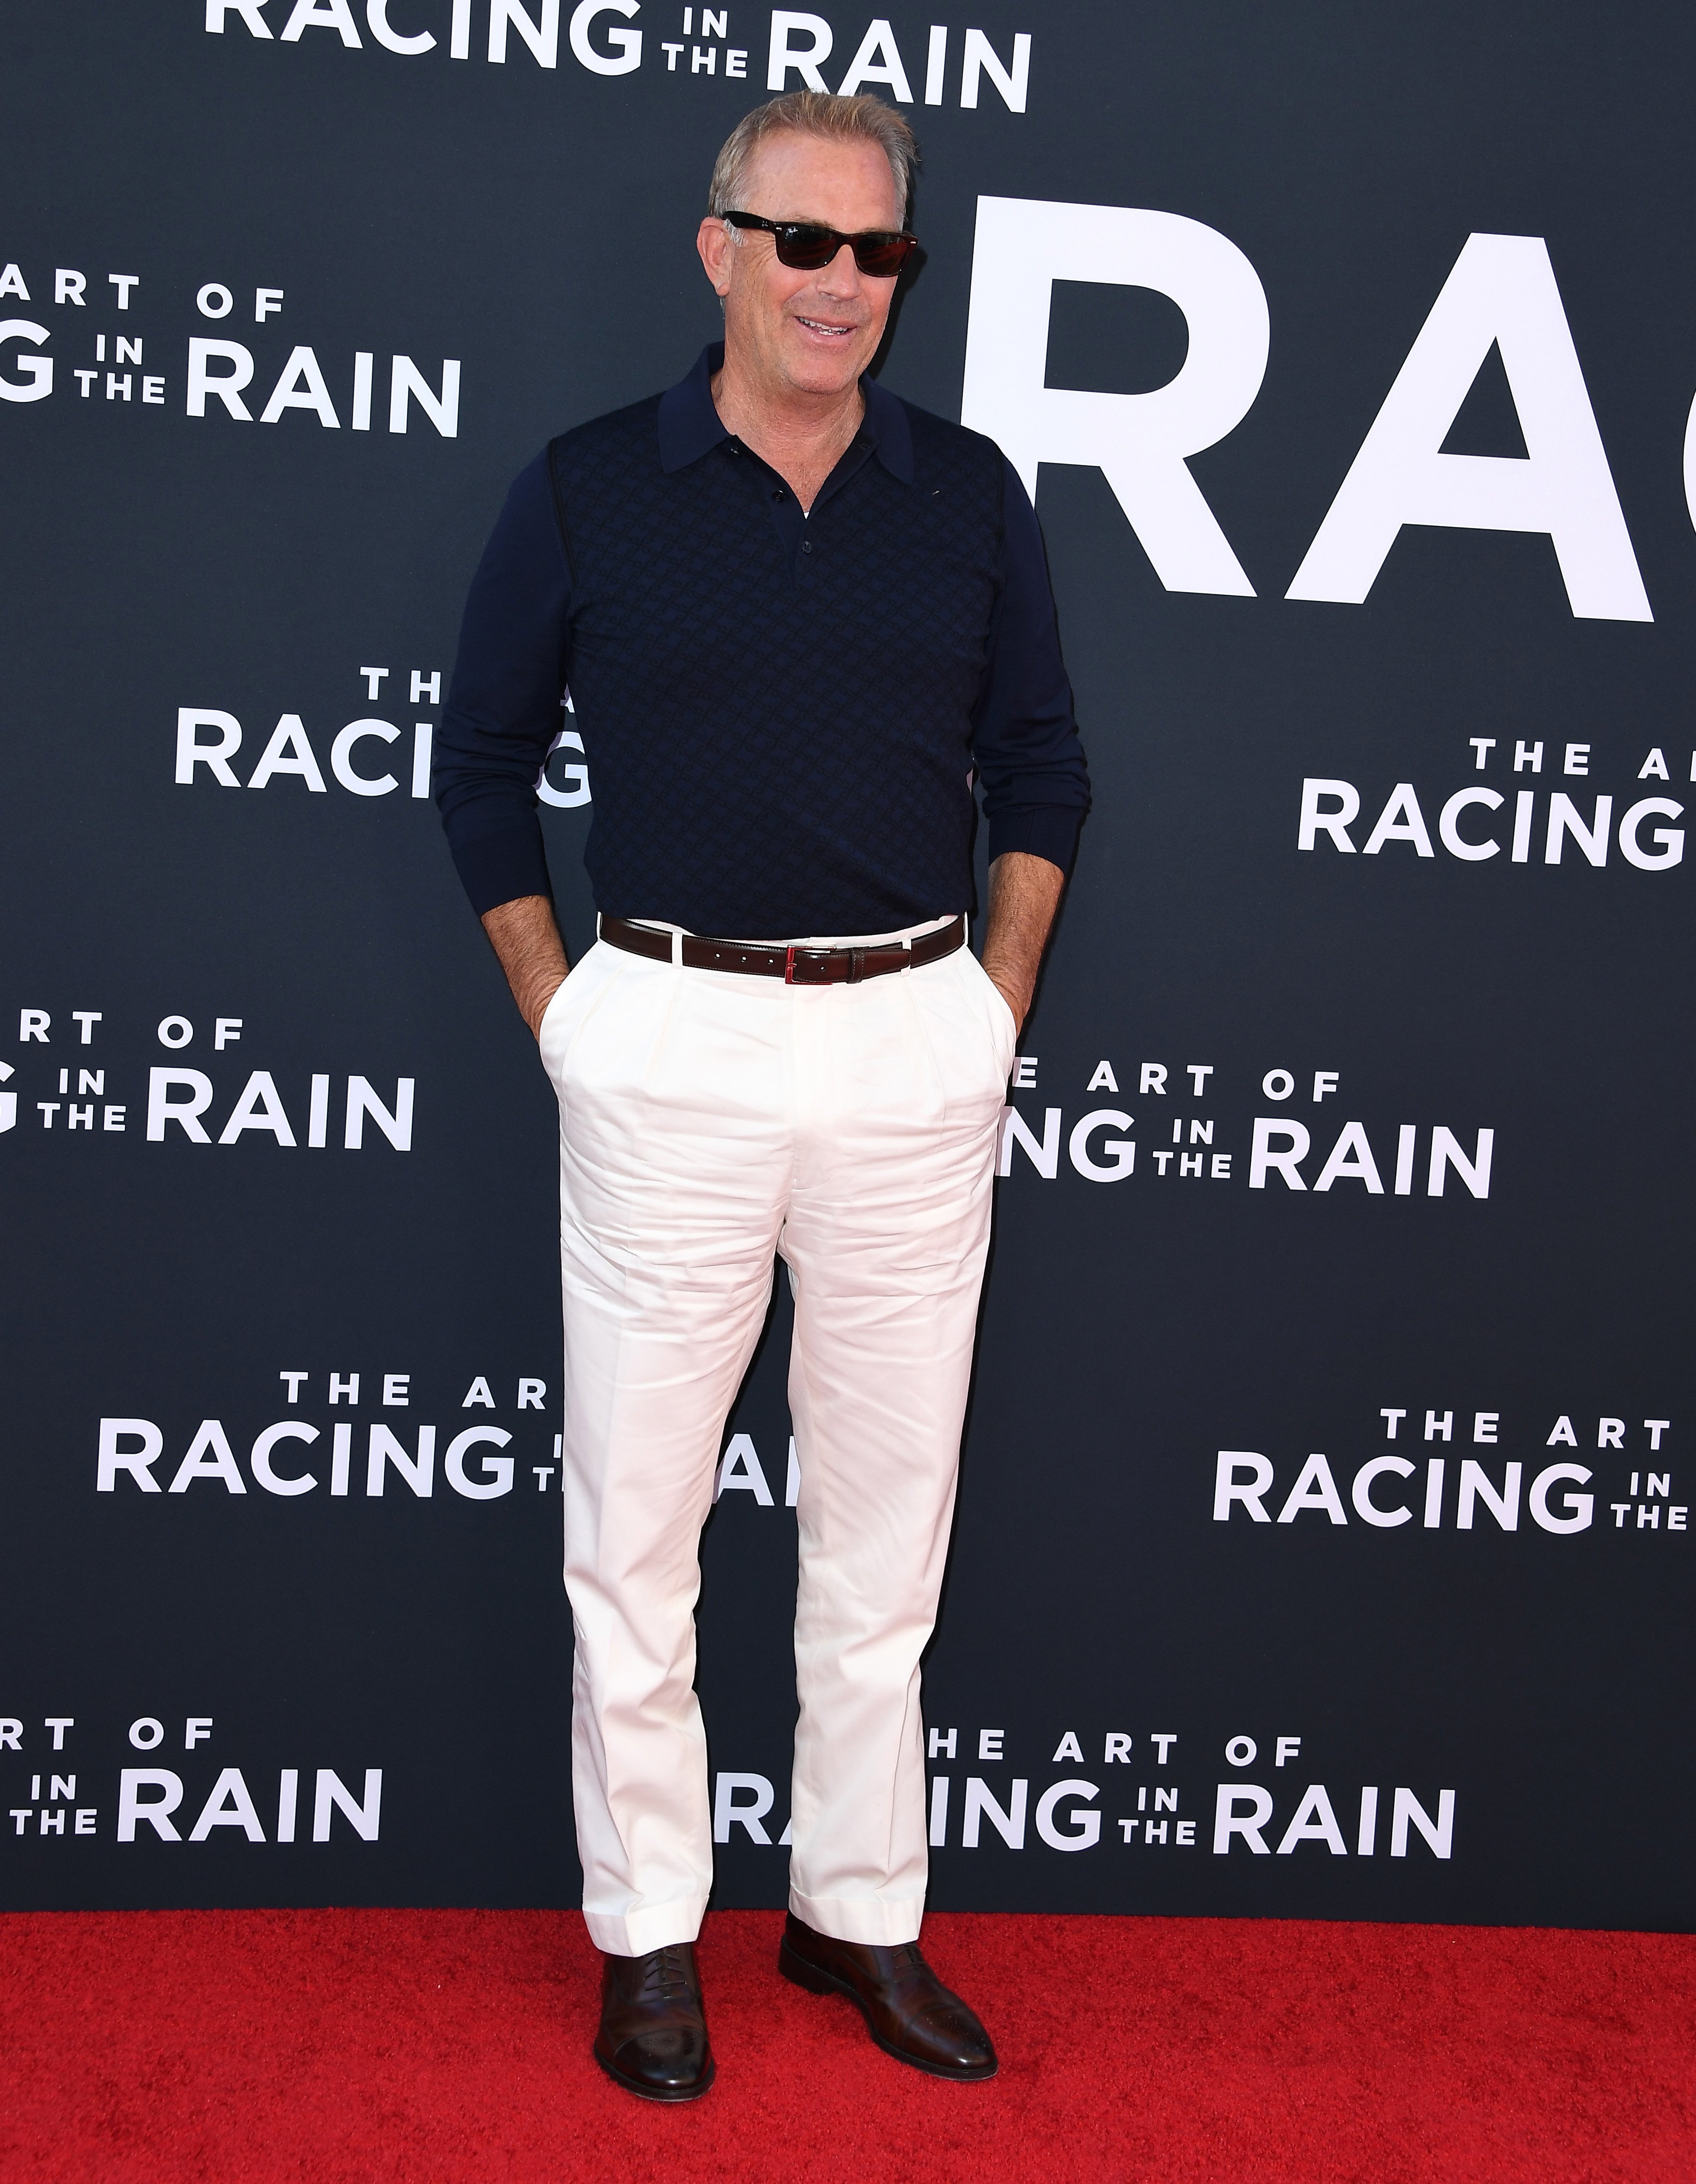 Kevin Costner at the Premiere Of 20th Century Fox's "The Art Of Racing In The Rain" at El Capitan Theatre on August 01, 2019 in Los Angeles, California. | Source: Getty Images